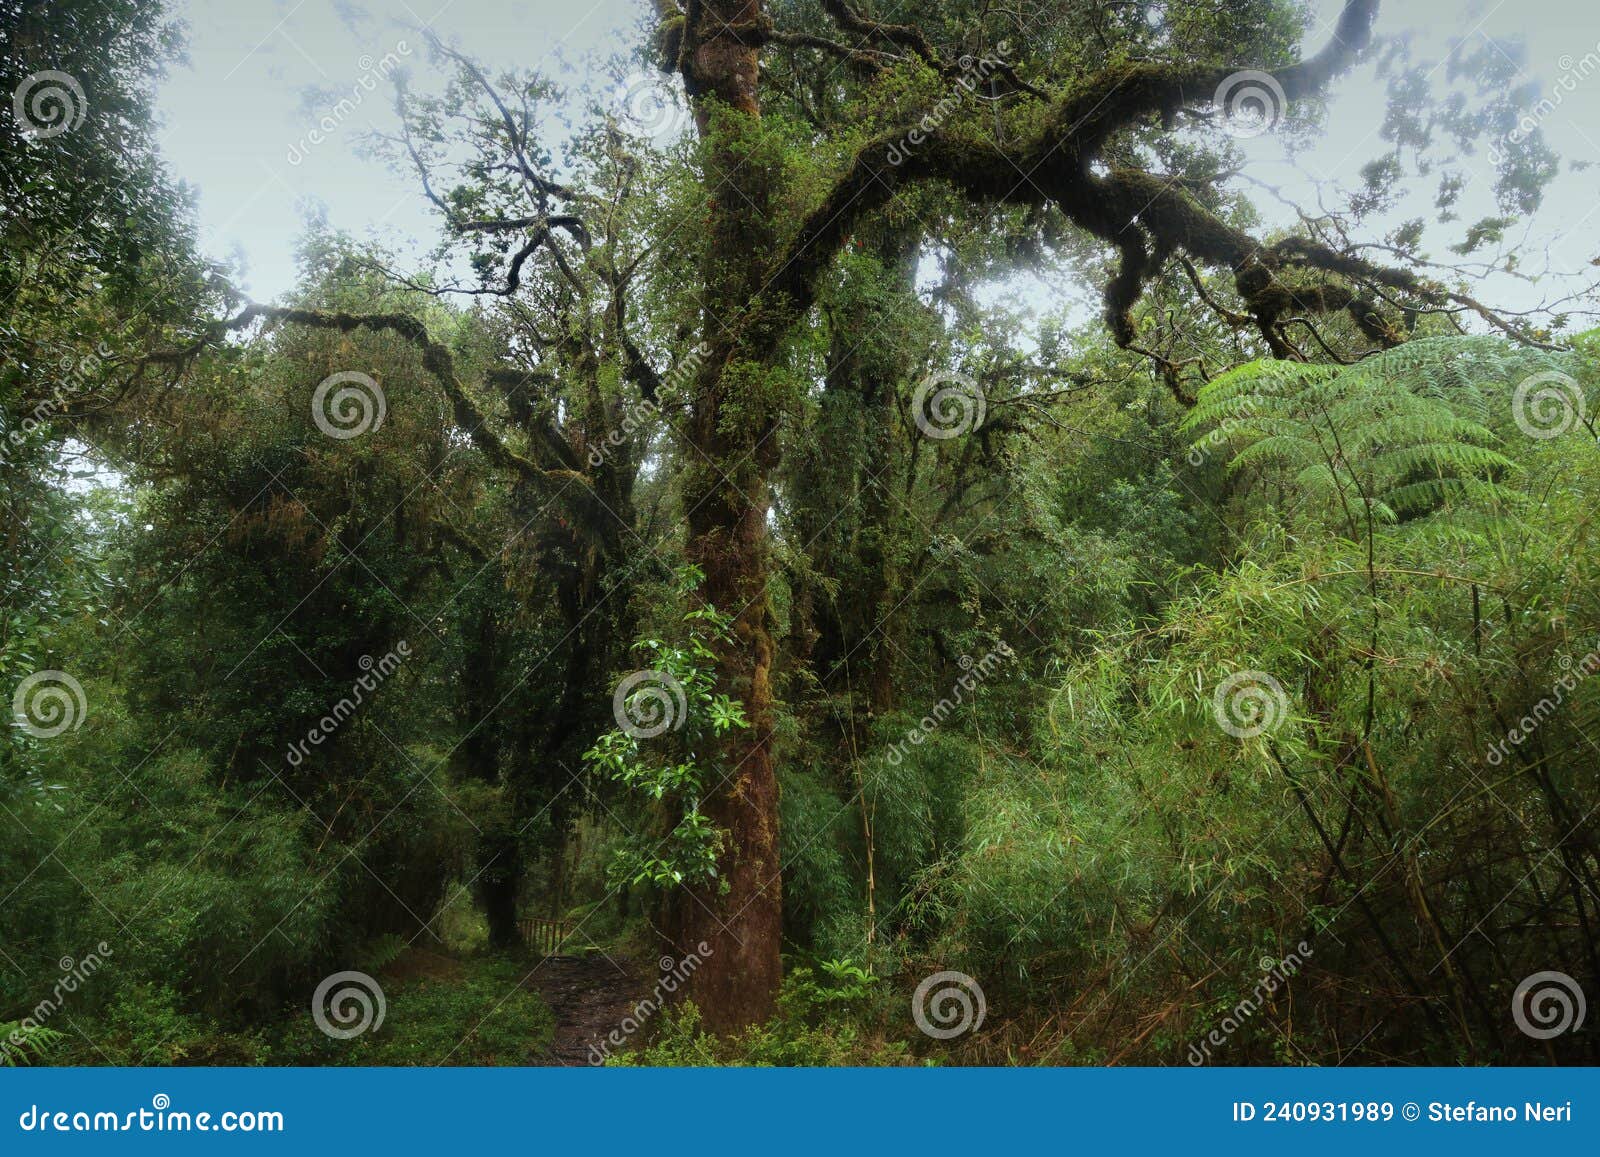 the forest of the alerce andino national park, chile